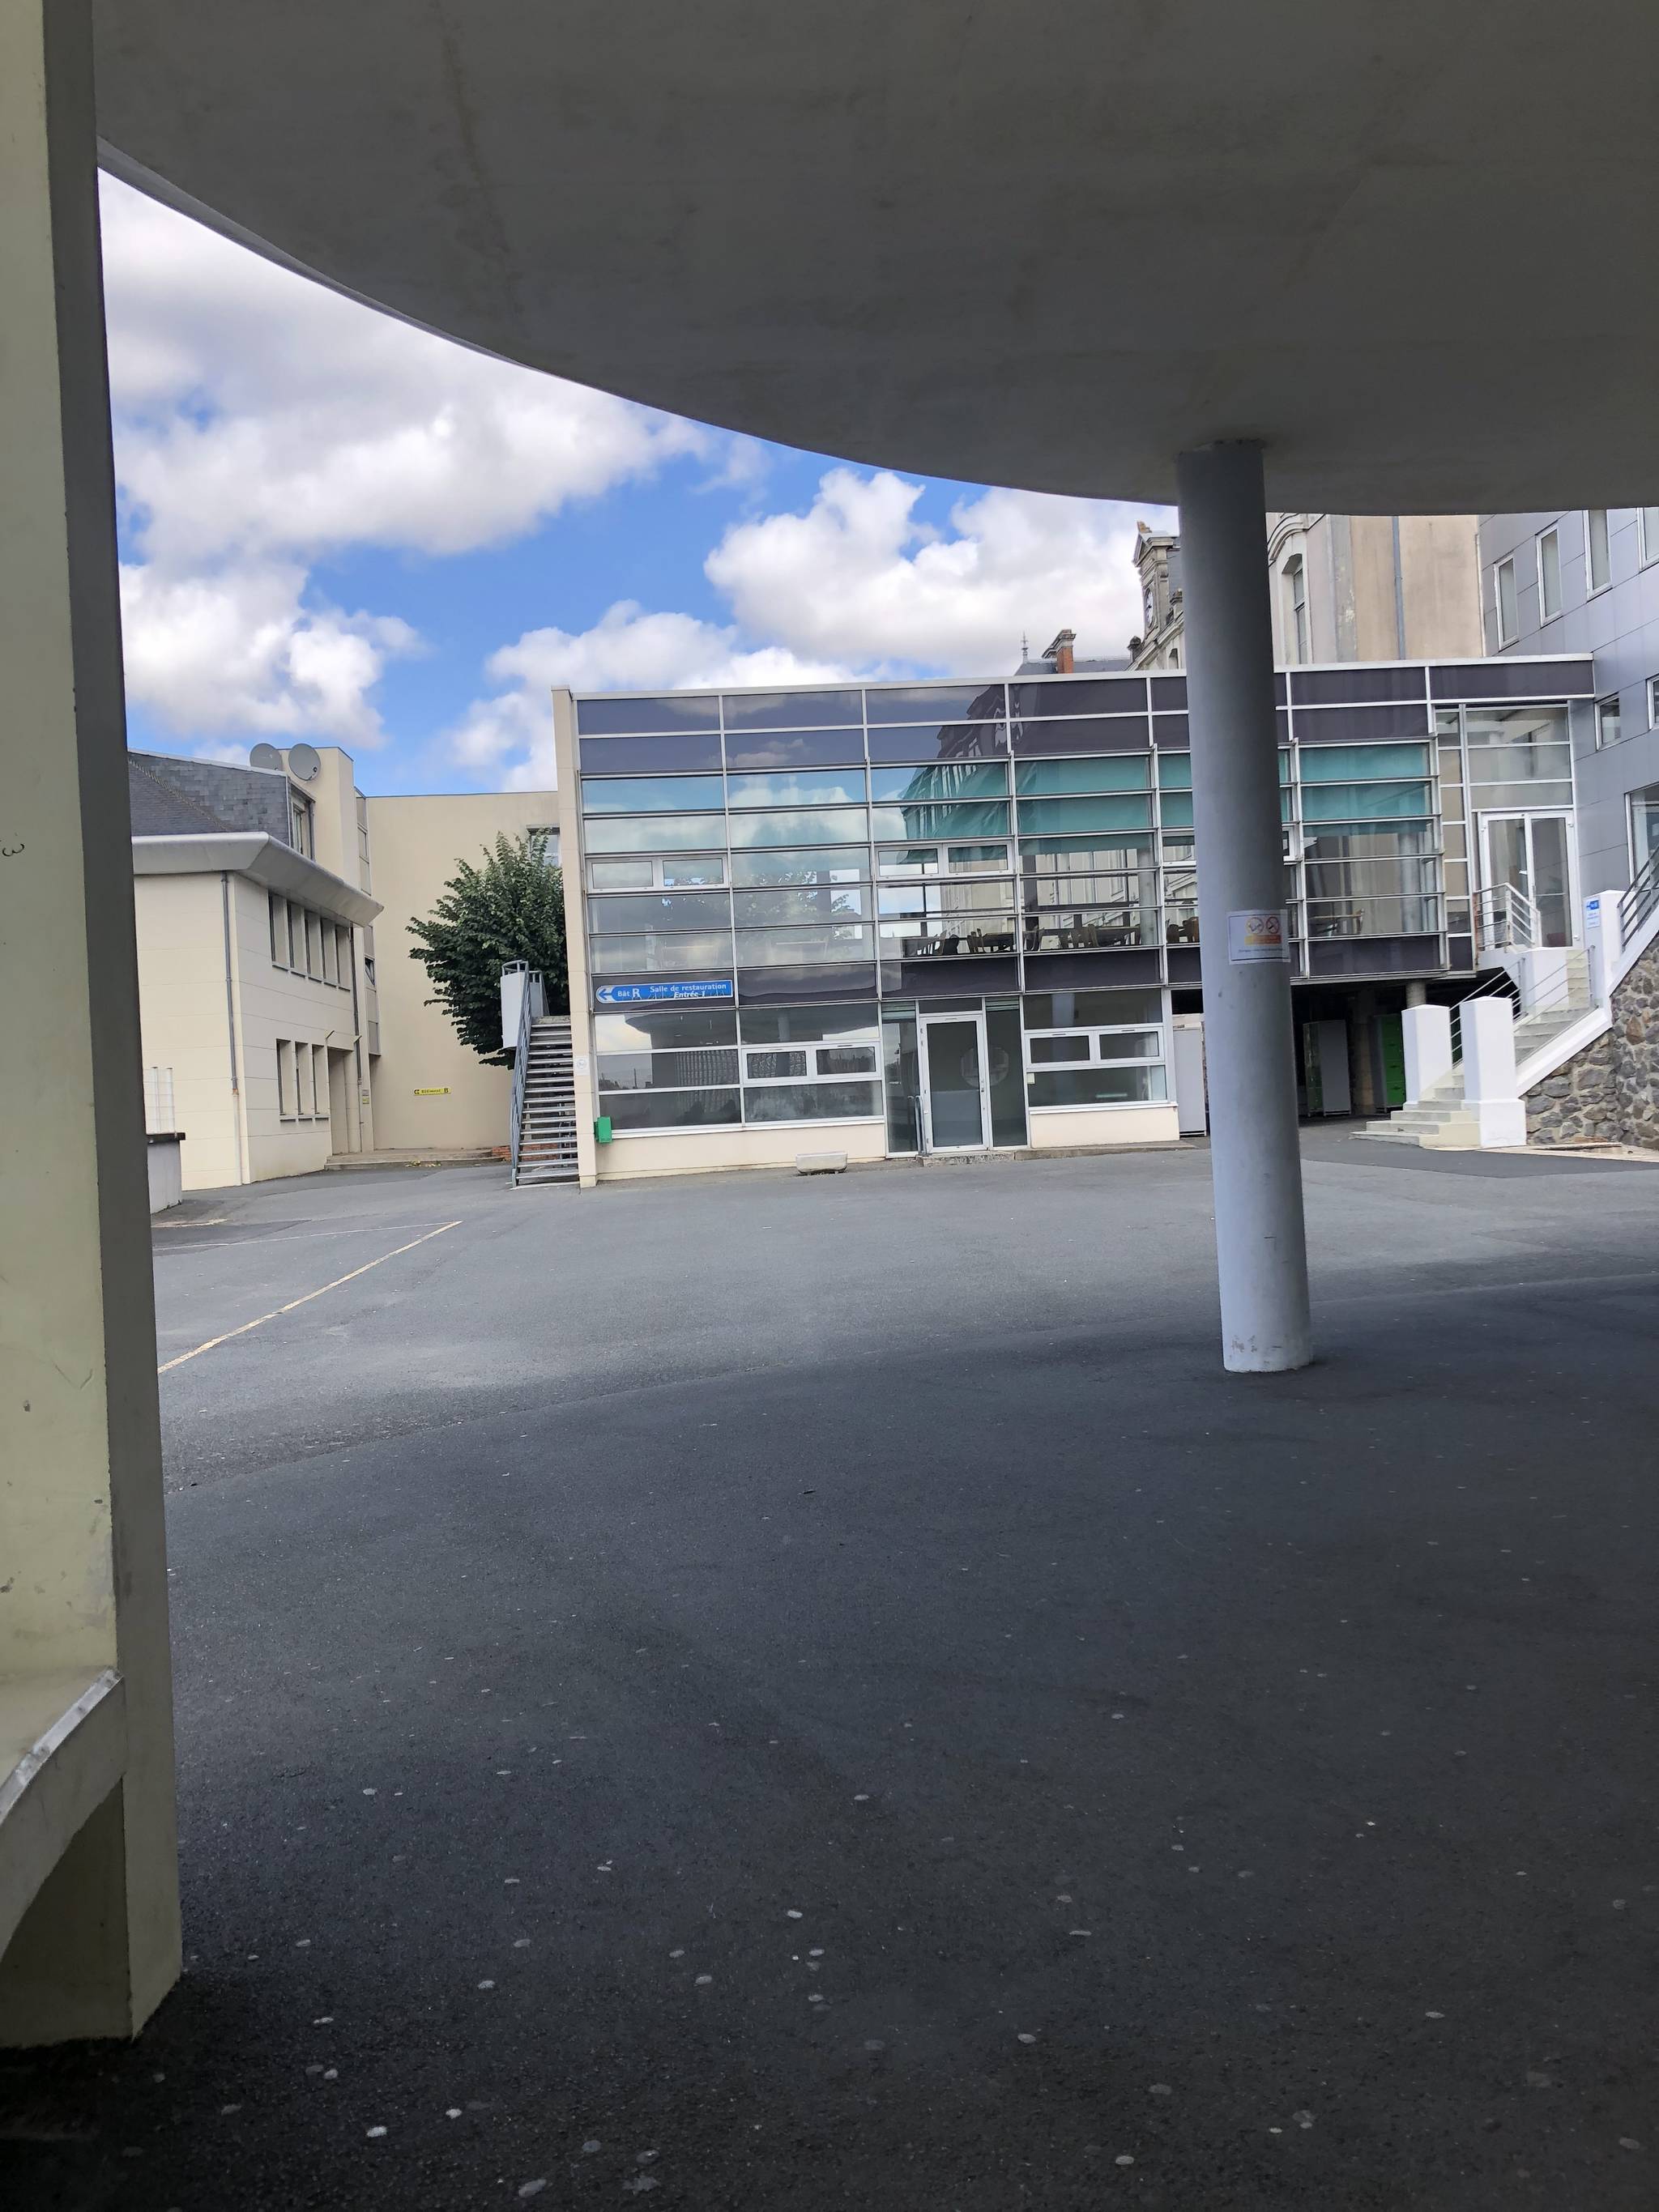 Outside view of the cafeteria and the building where I have most of my classes on Sept. 7, 2018. (Bridget McTague | For the Juneau Empire)